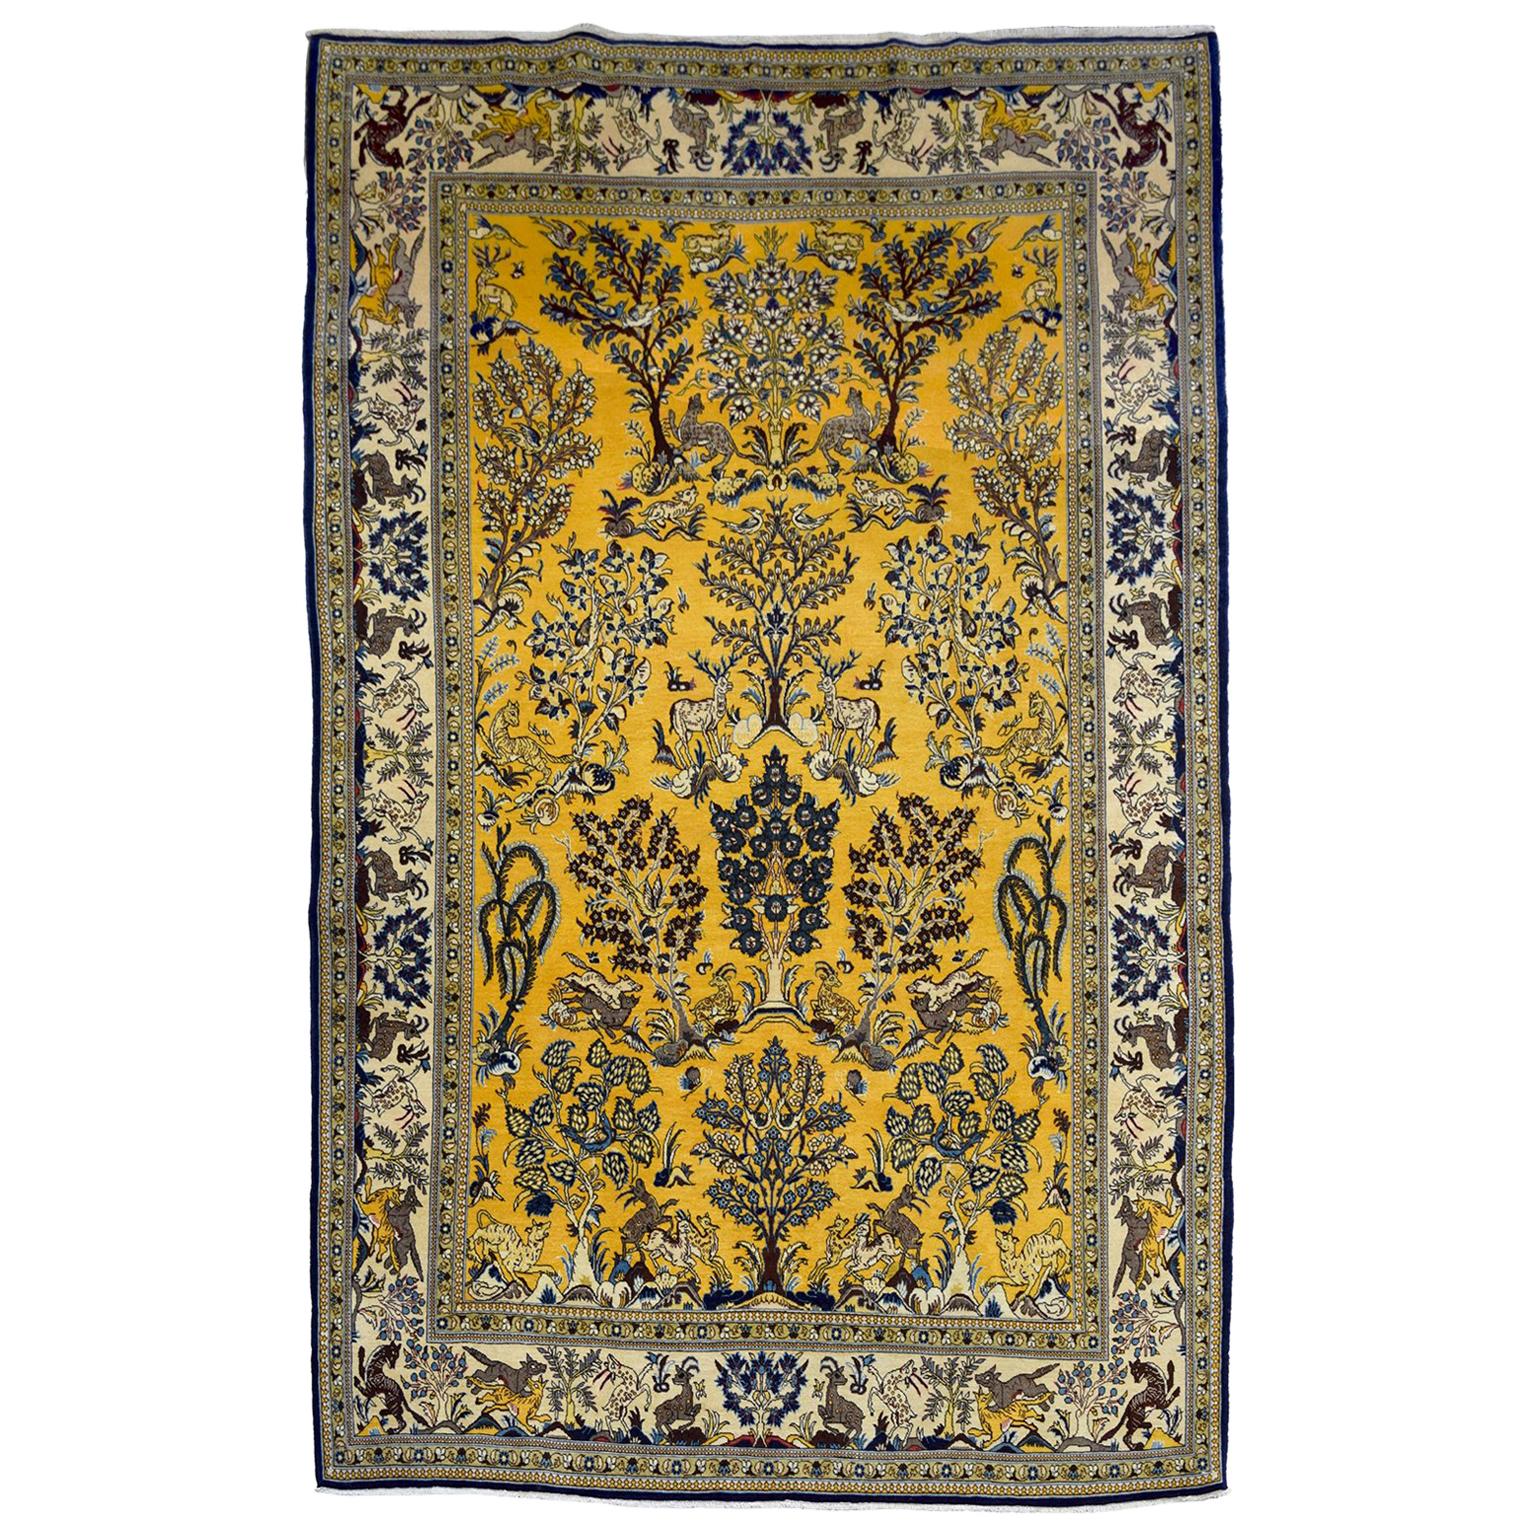 Semi-antique 1940s Gold and Blue Ghom Tree of Life Wool Persian Rug, 8' x 10' For Sale